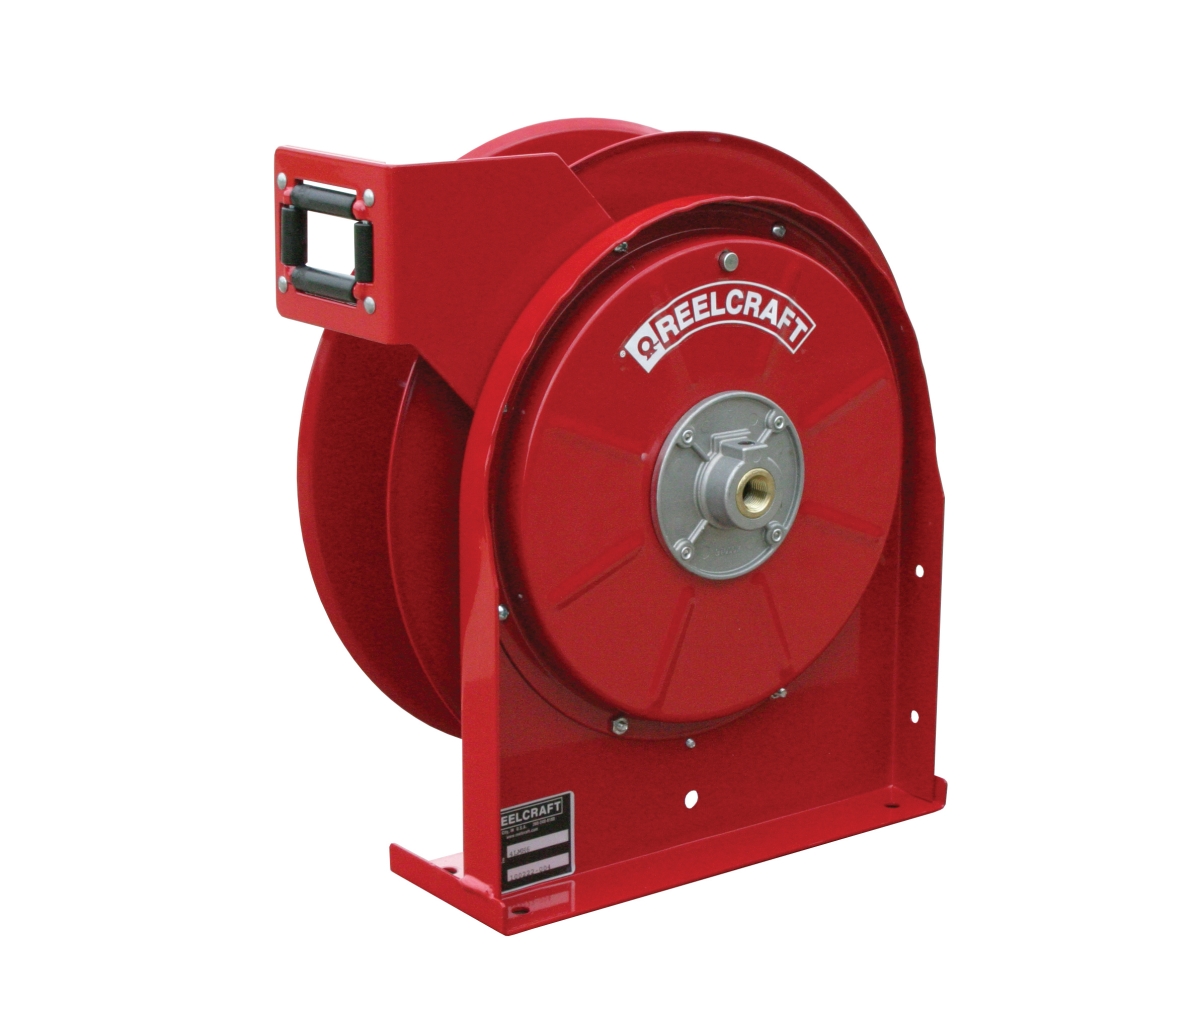 5600 Omp 0.375 In. X 30 Ft. Premium Duty 3000 Psi Oil Without Hose Reel, Red